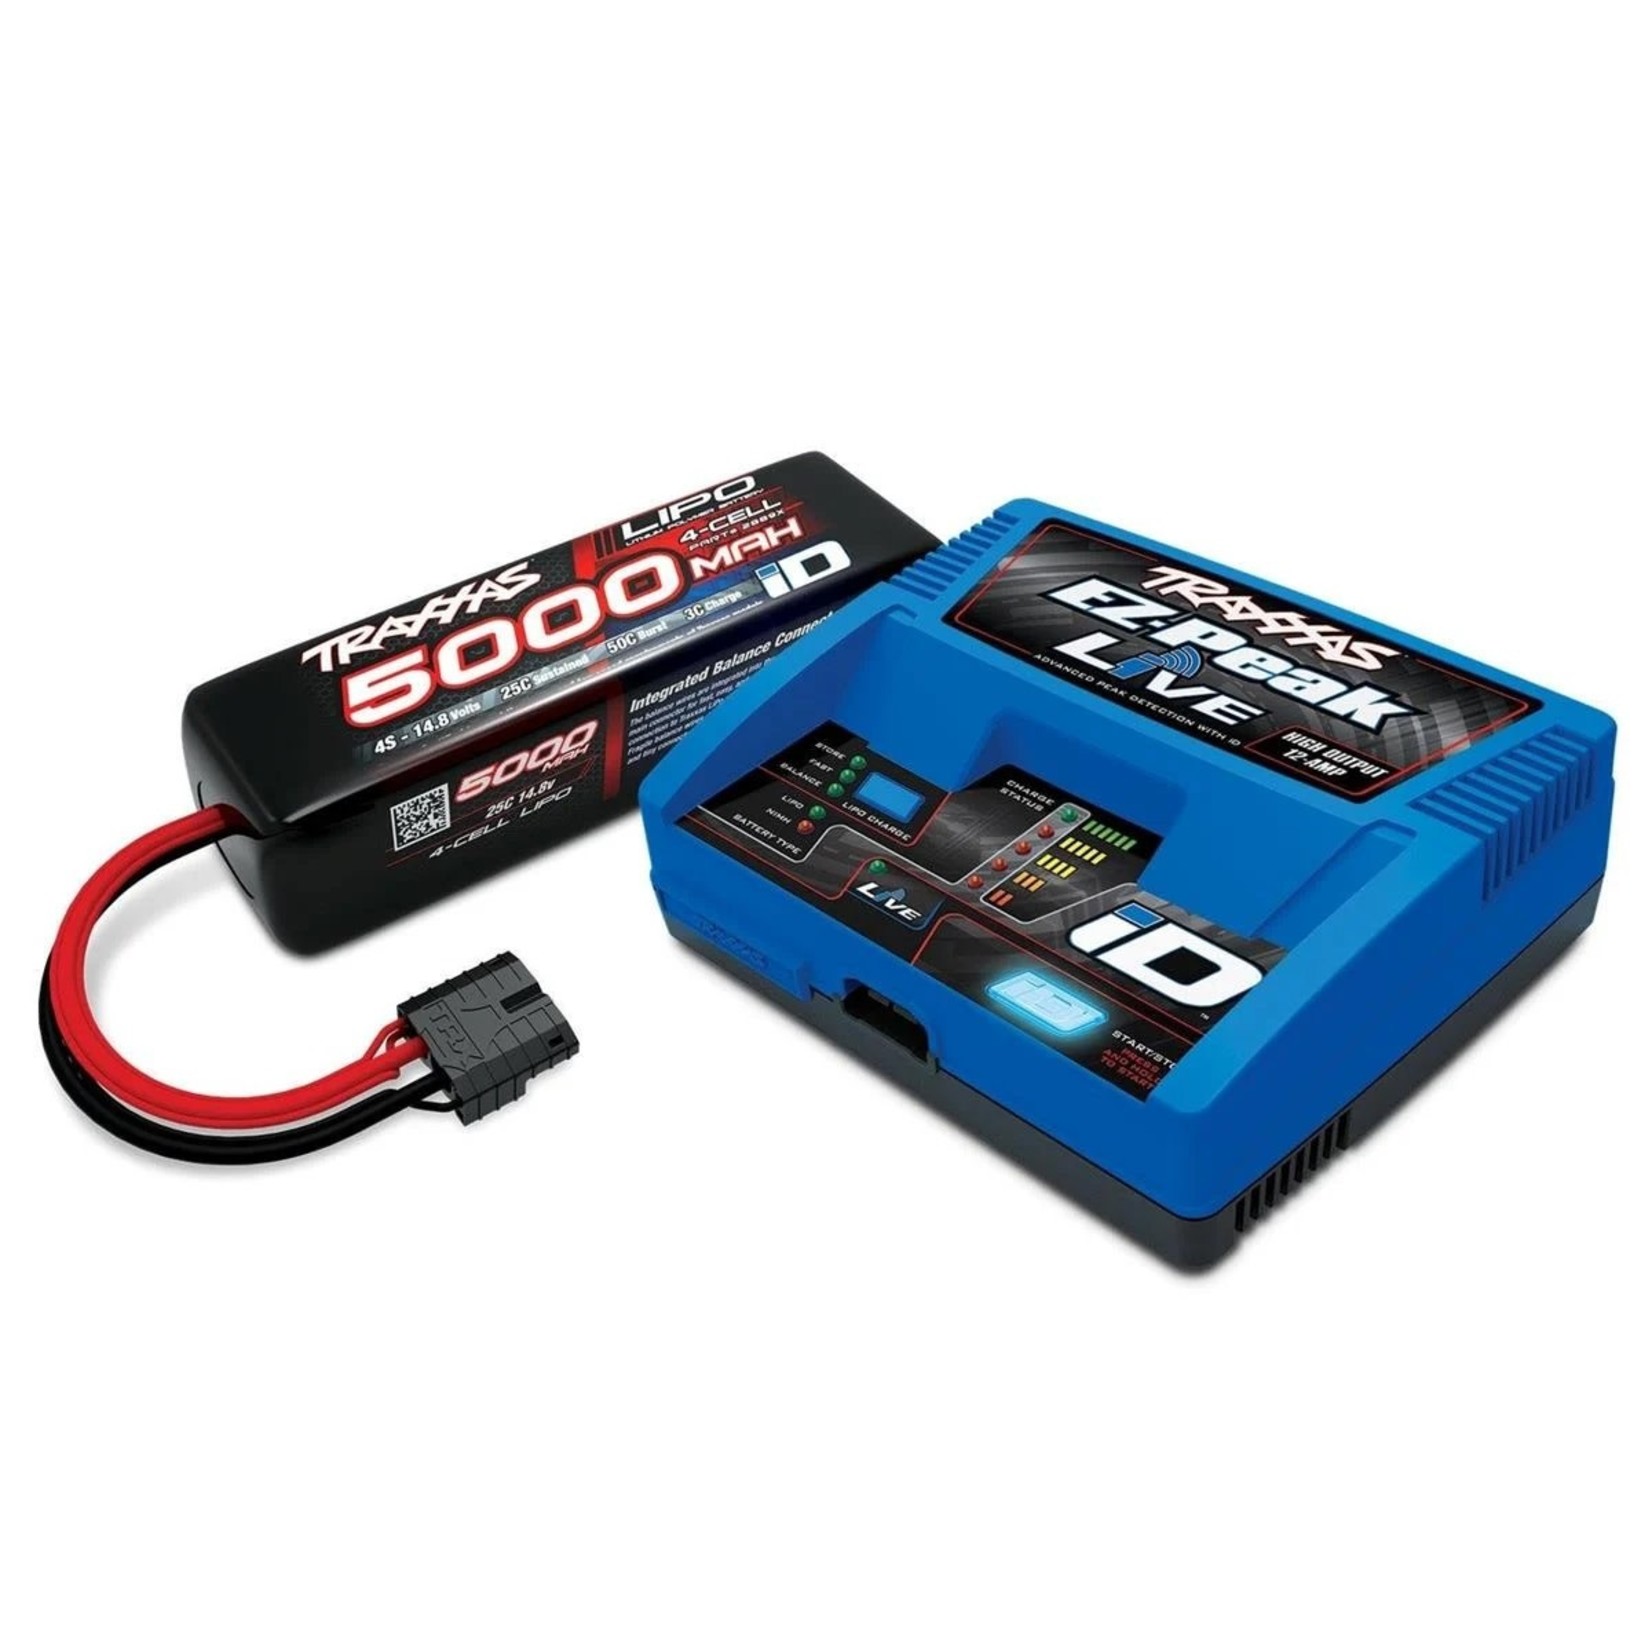 Traxxas Traxxas 4S Battery/Charger Completer Pack #2996X